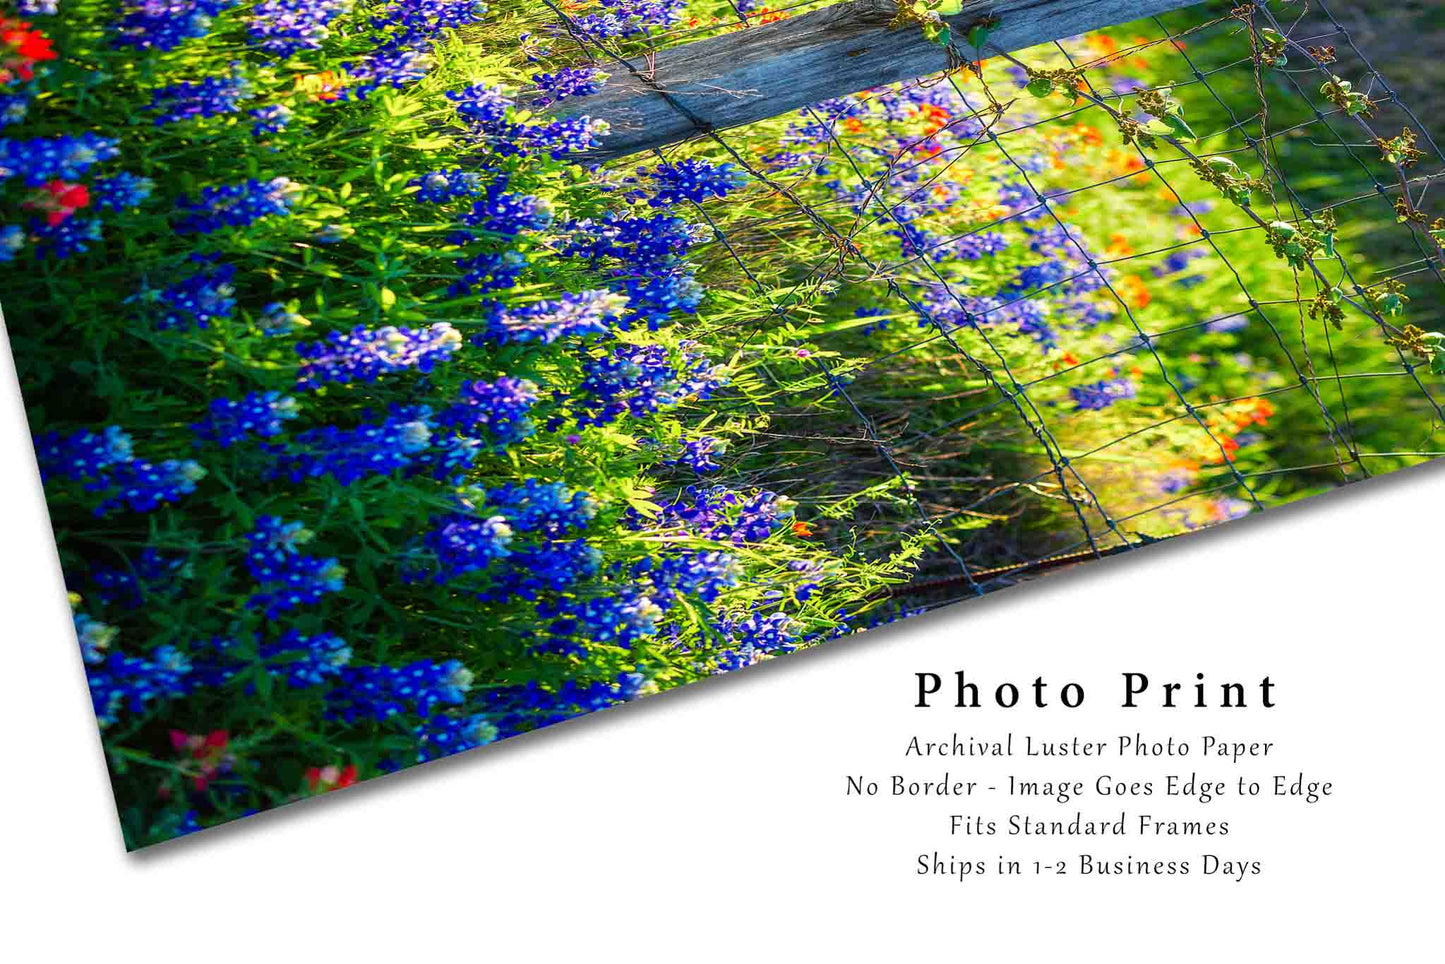 Country Photography Print (Not Framed) Vertical Picture of Fence Post Surrounded by Bluebonnets on Spring Day in Texas Wildflower Wall Art Farmhouse Decor